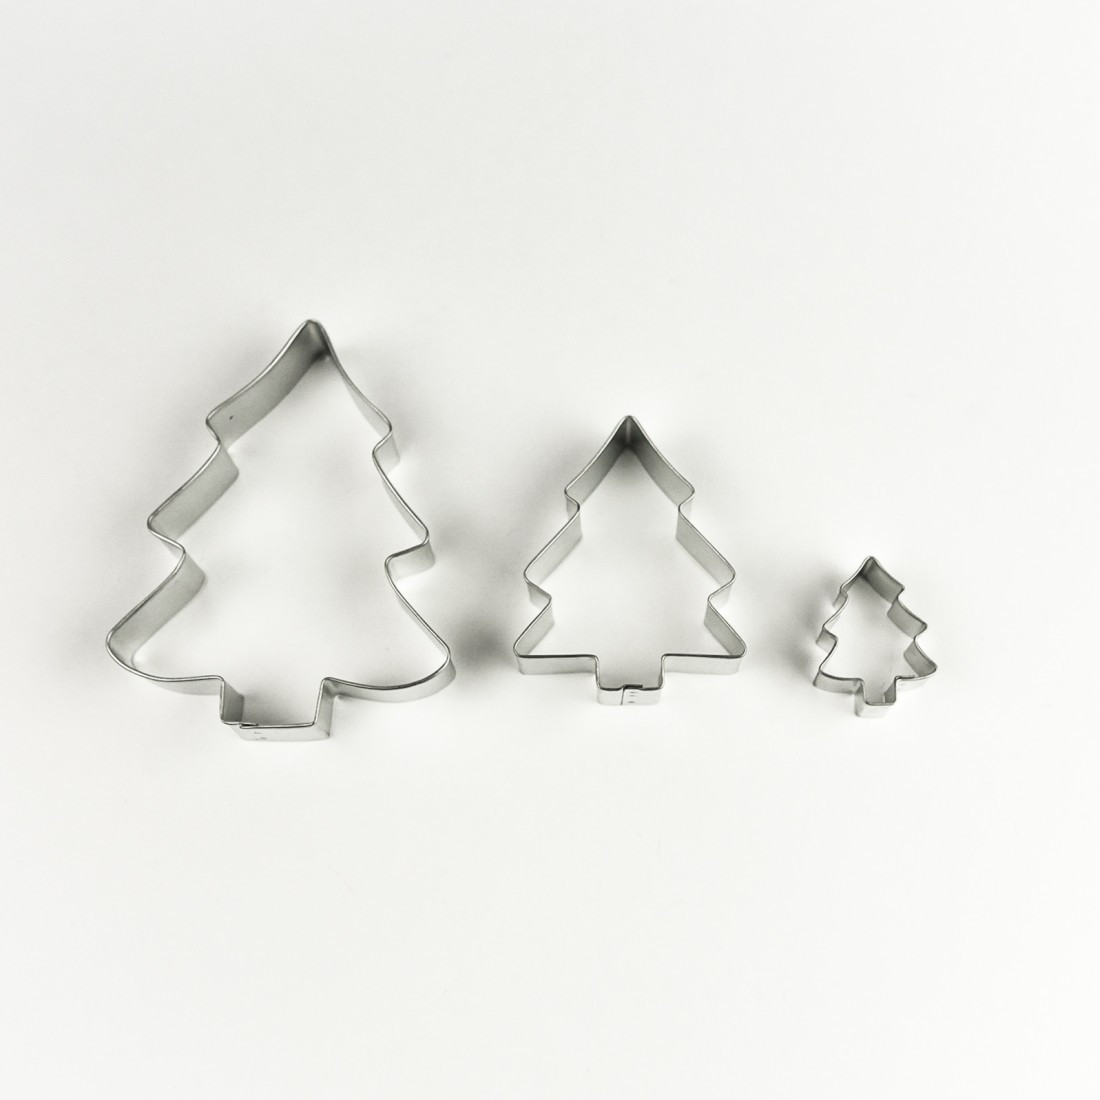 Christmas Tree Cookies Cutter
 R and M Christmas Tree Cookie Cutter Set